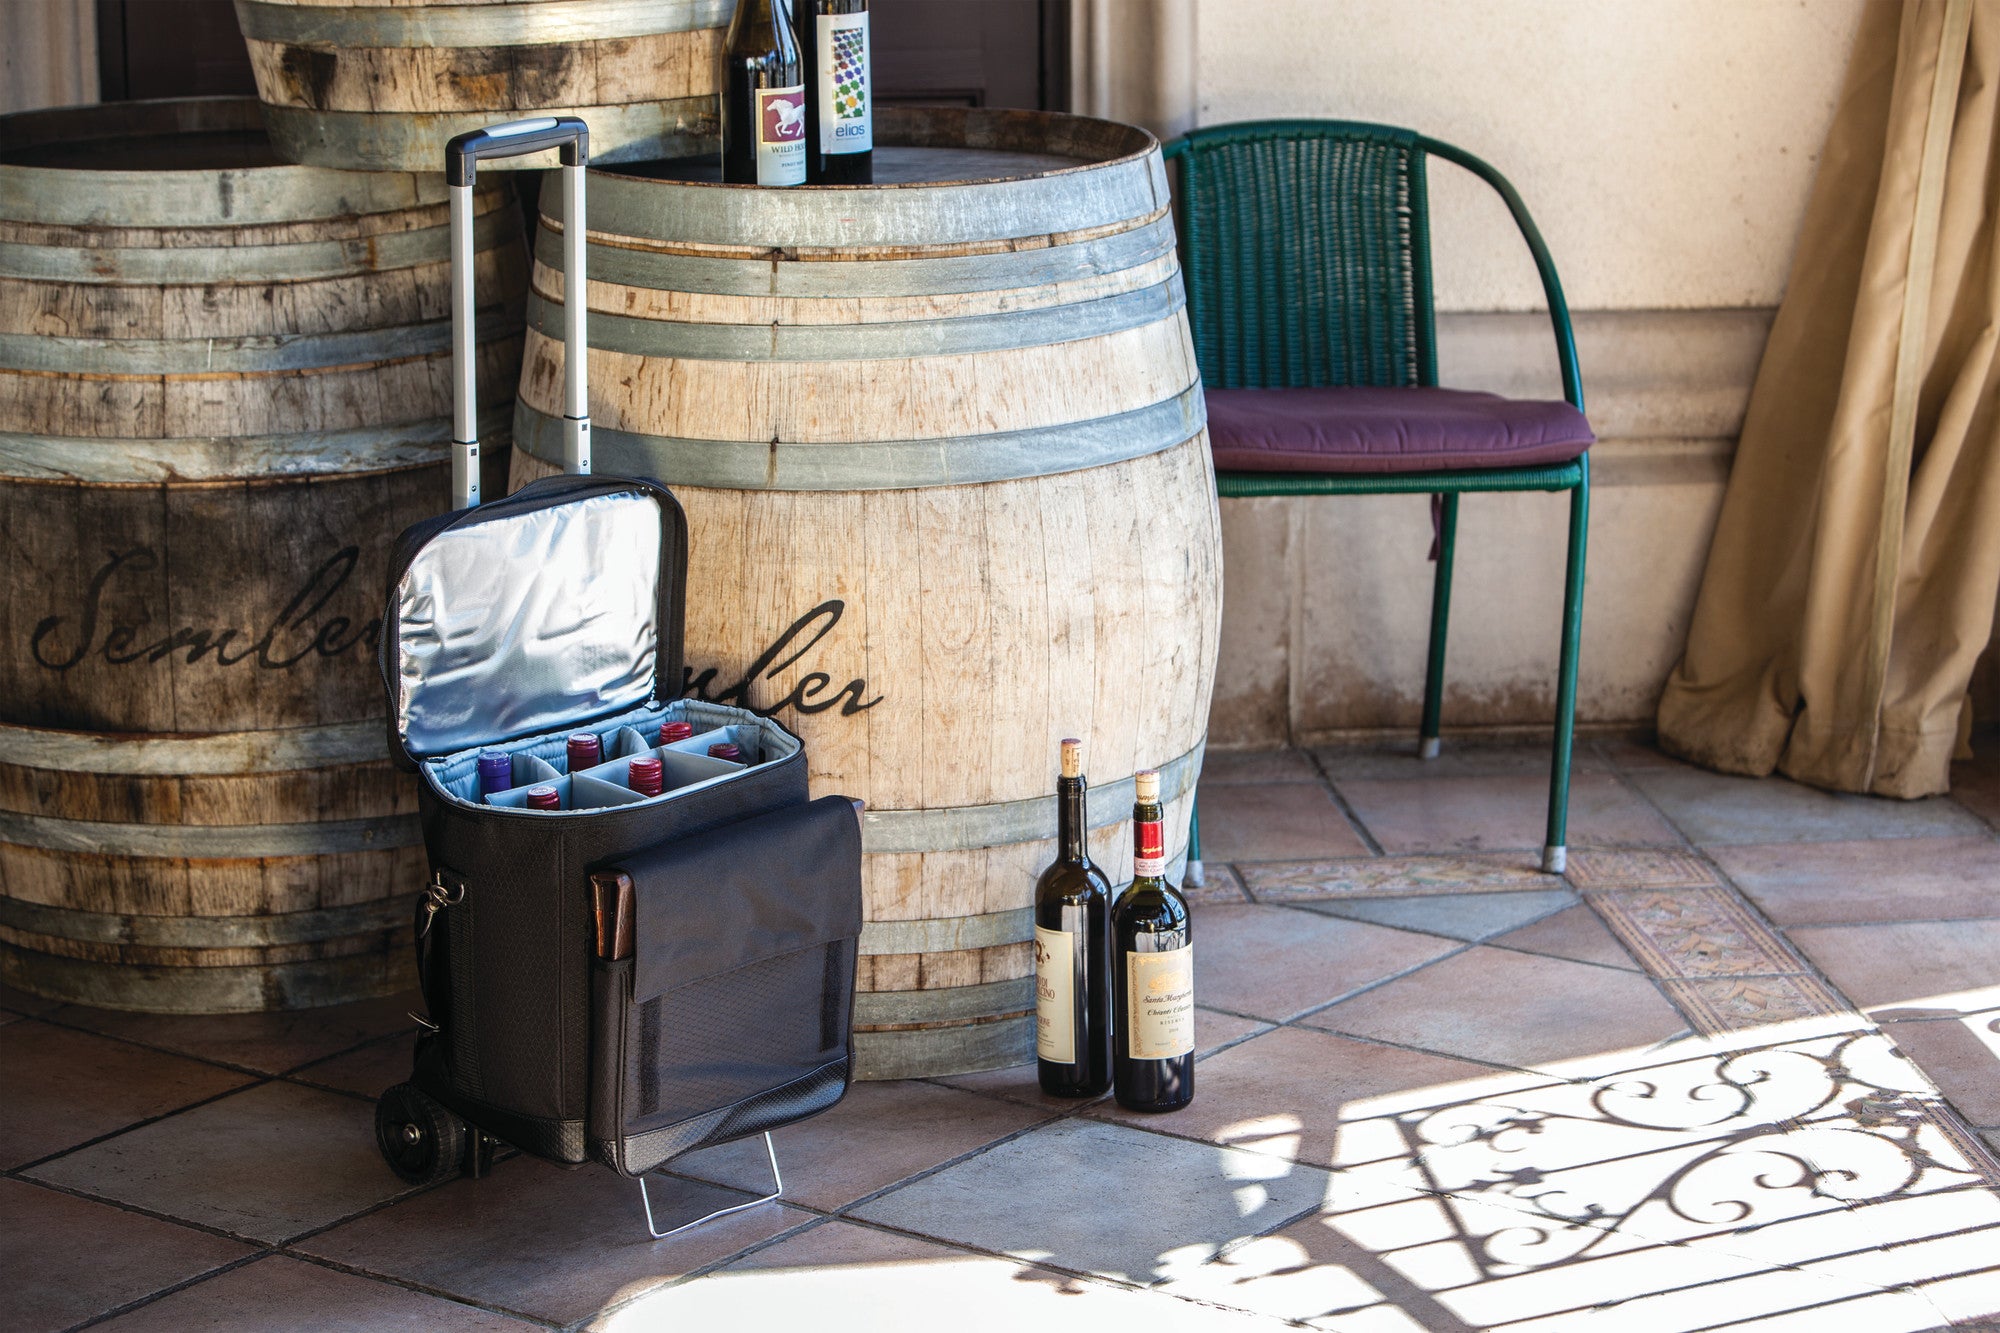 Buffalo Bills - Cellar 6-Bottle Wine Carrier & Cooler Tote with Trolley